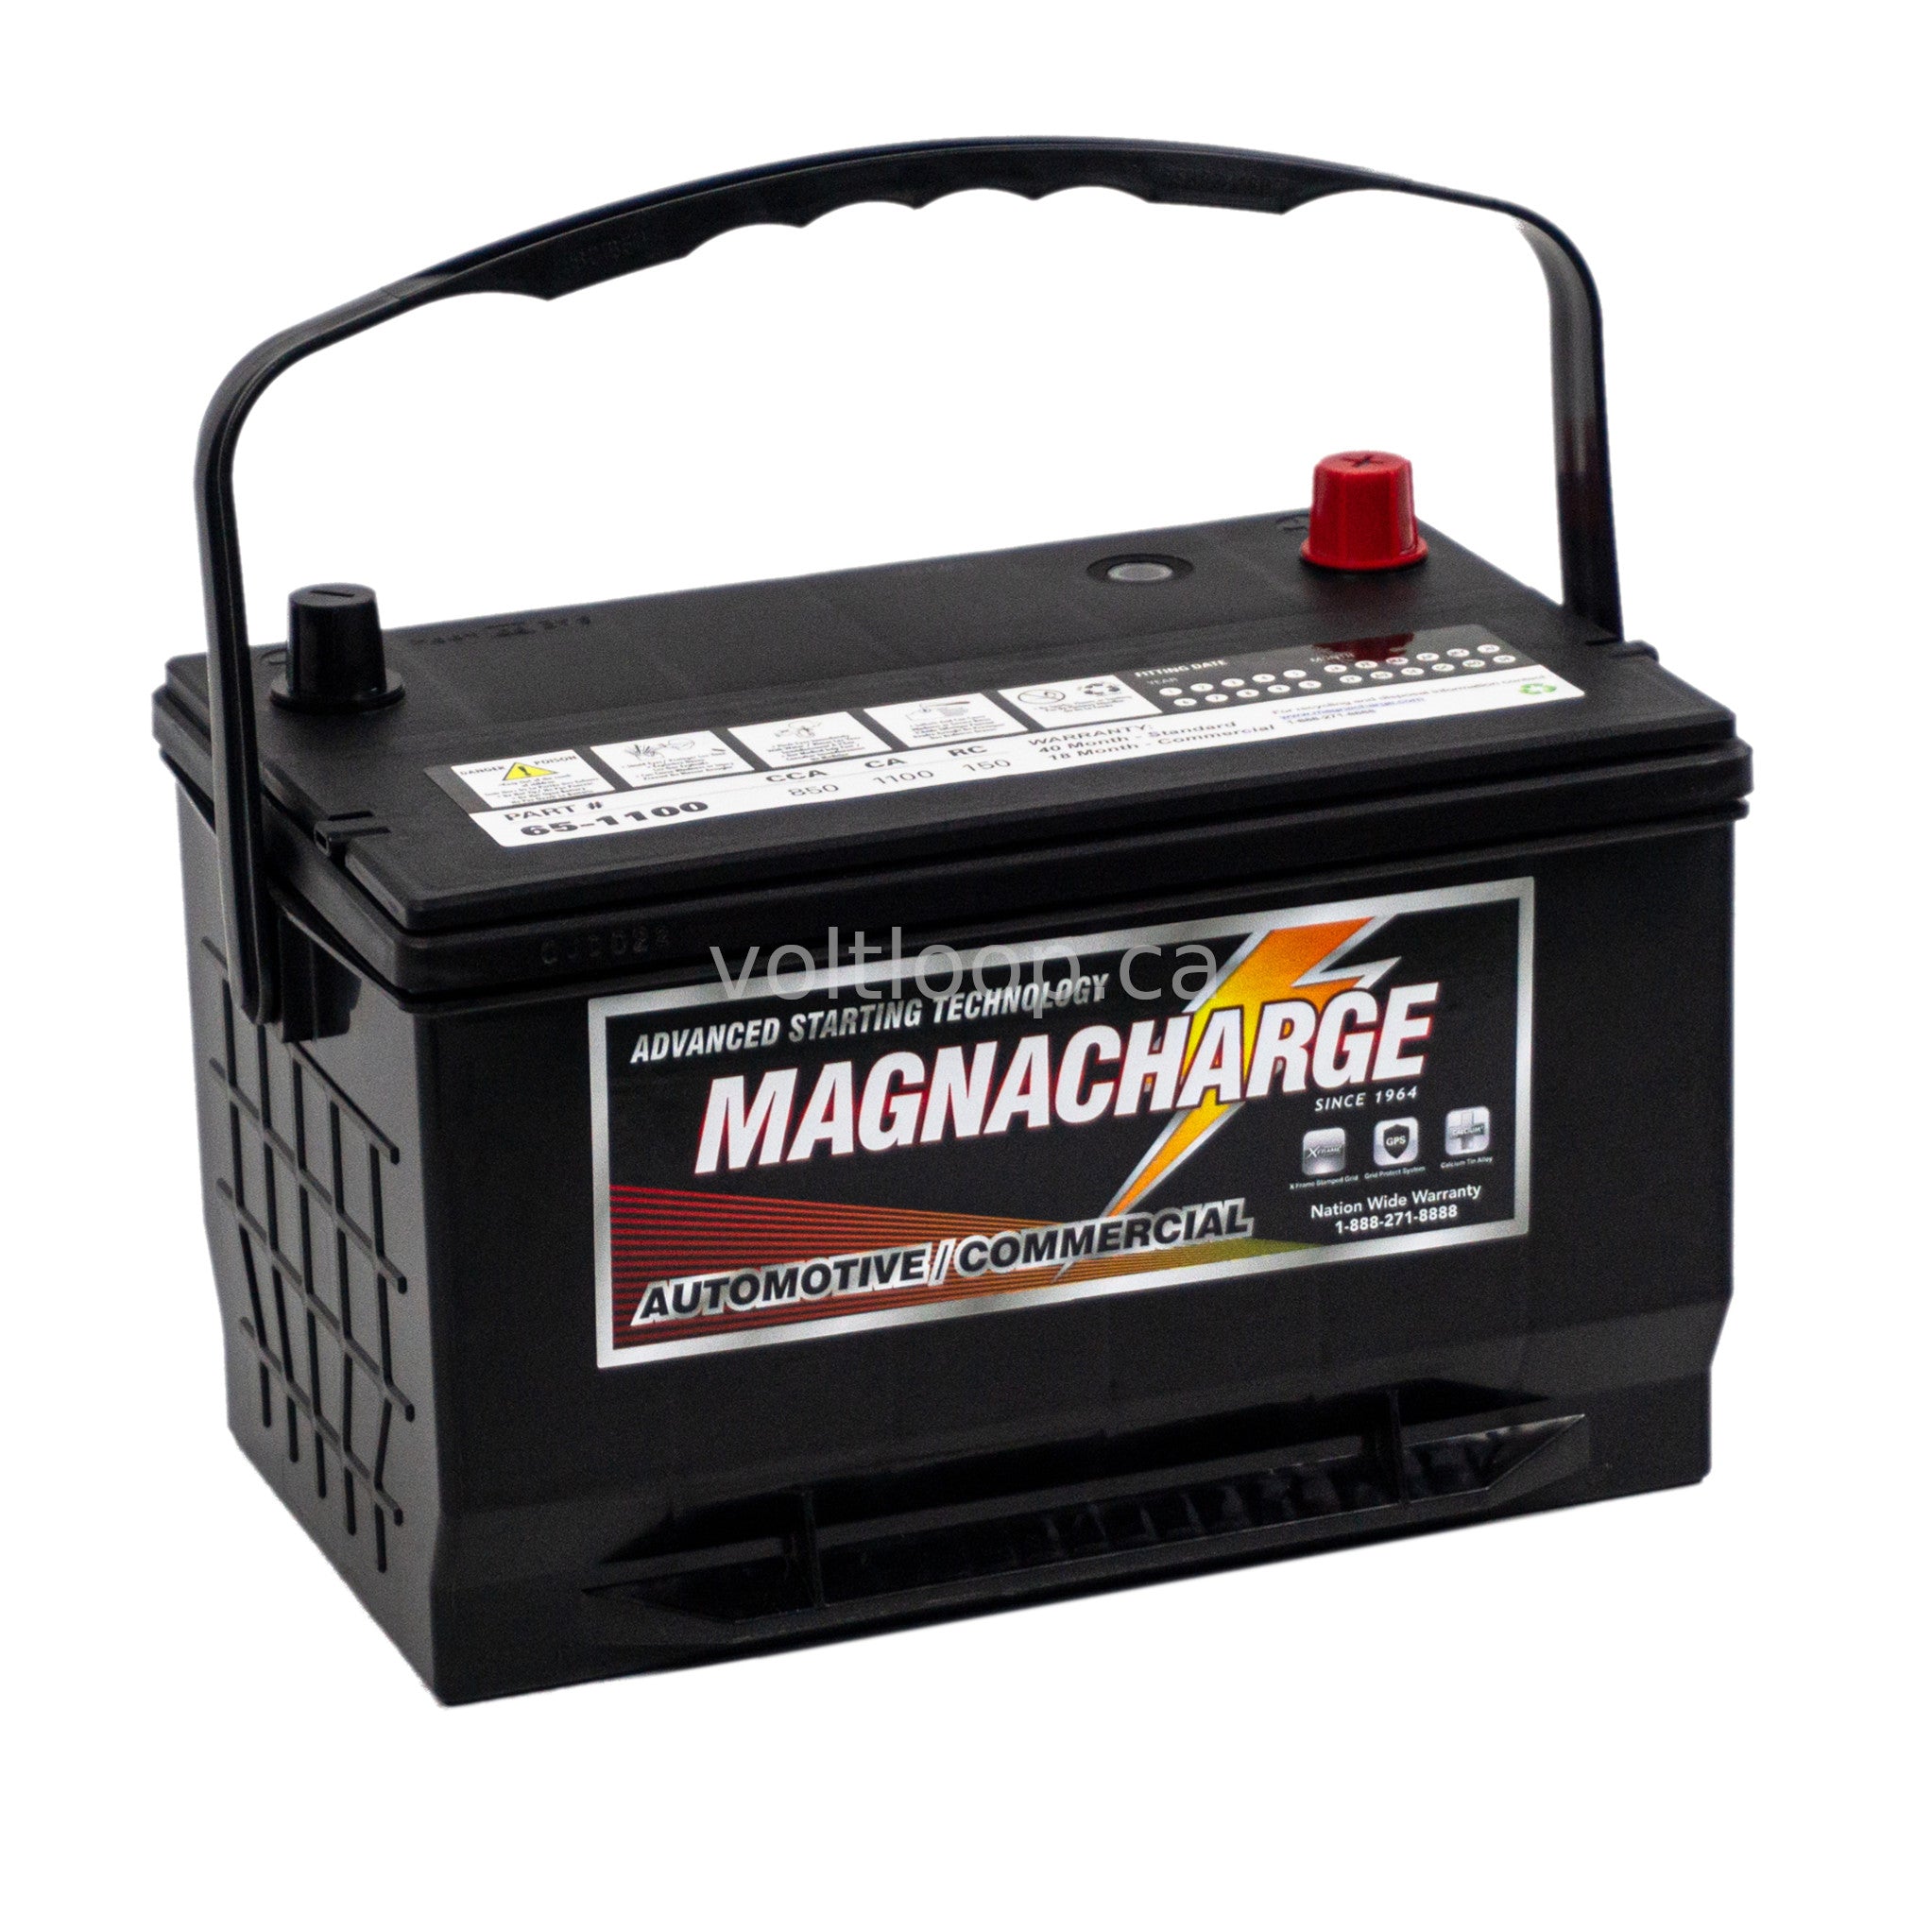 Magnacharge 65-1100 Group 65 Car Battery